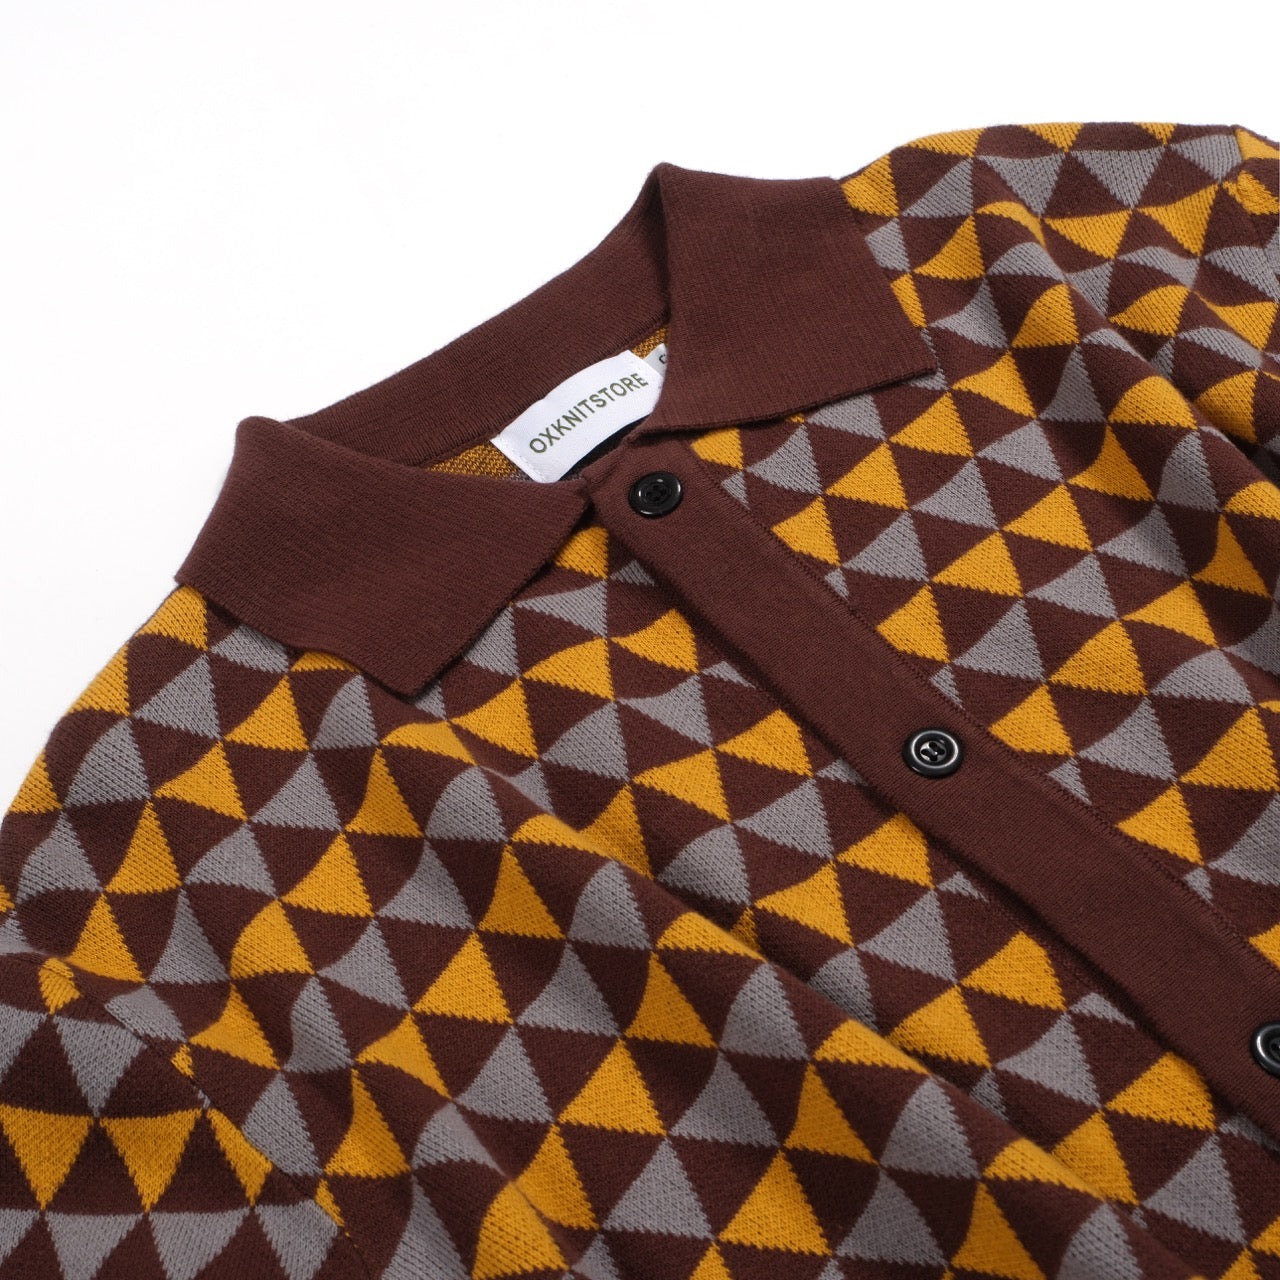 Men's Yellow Triangle Pattern Knitted Long Sleeves Brown Cardigan